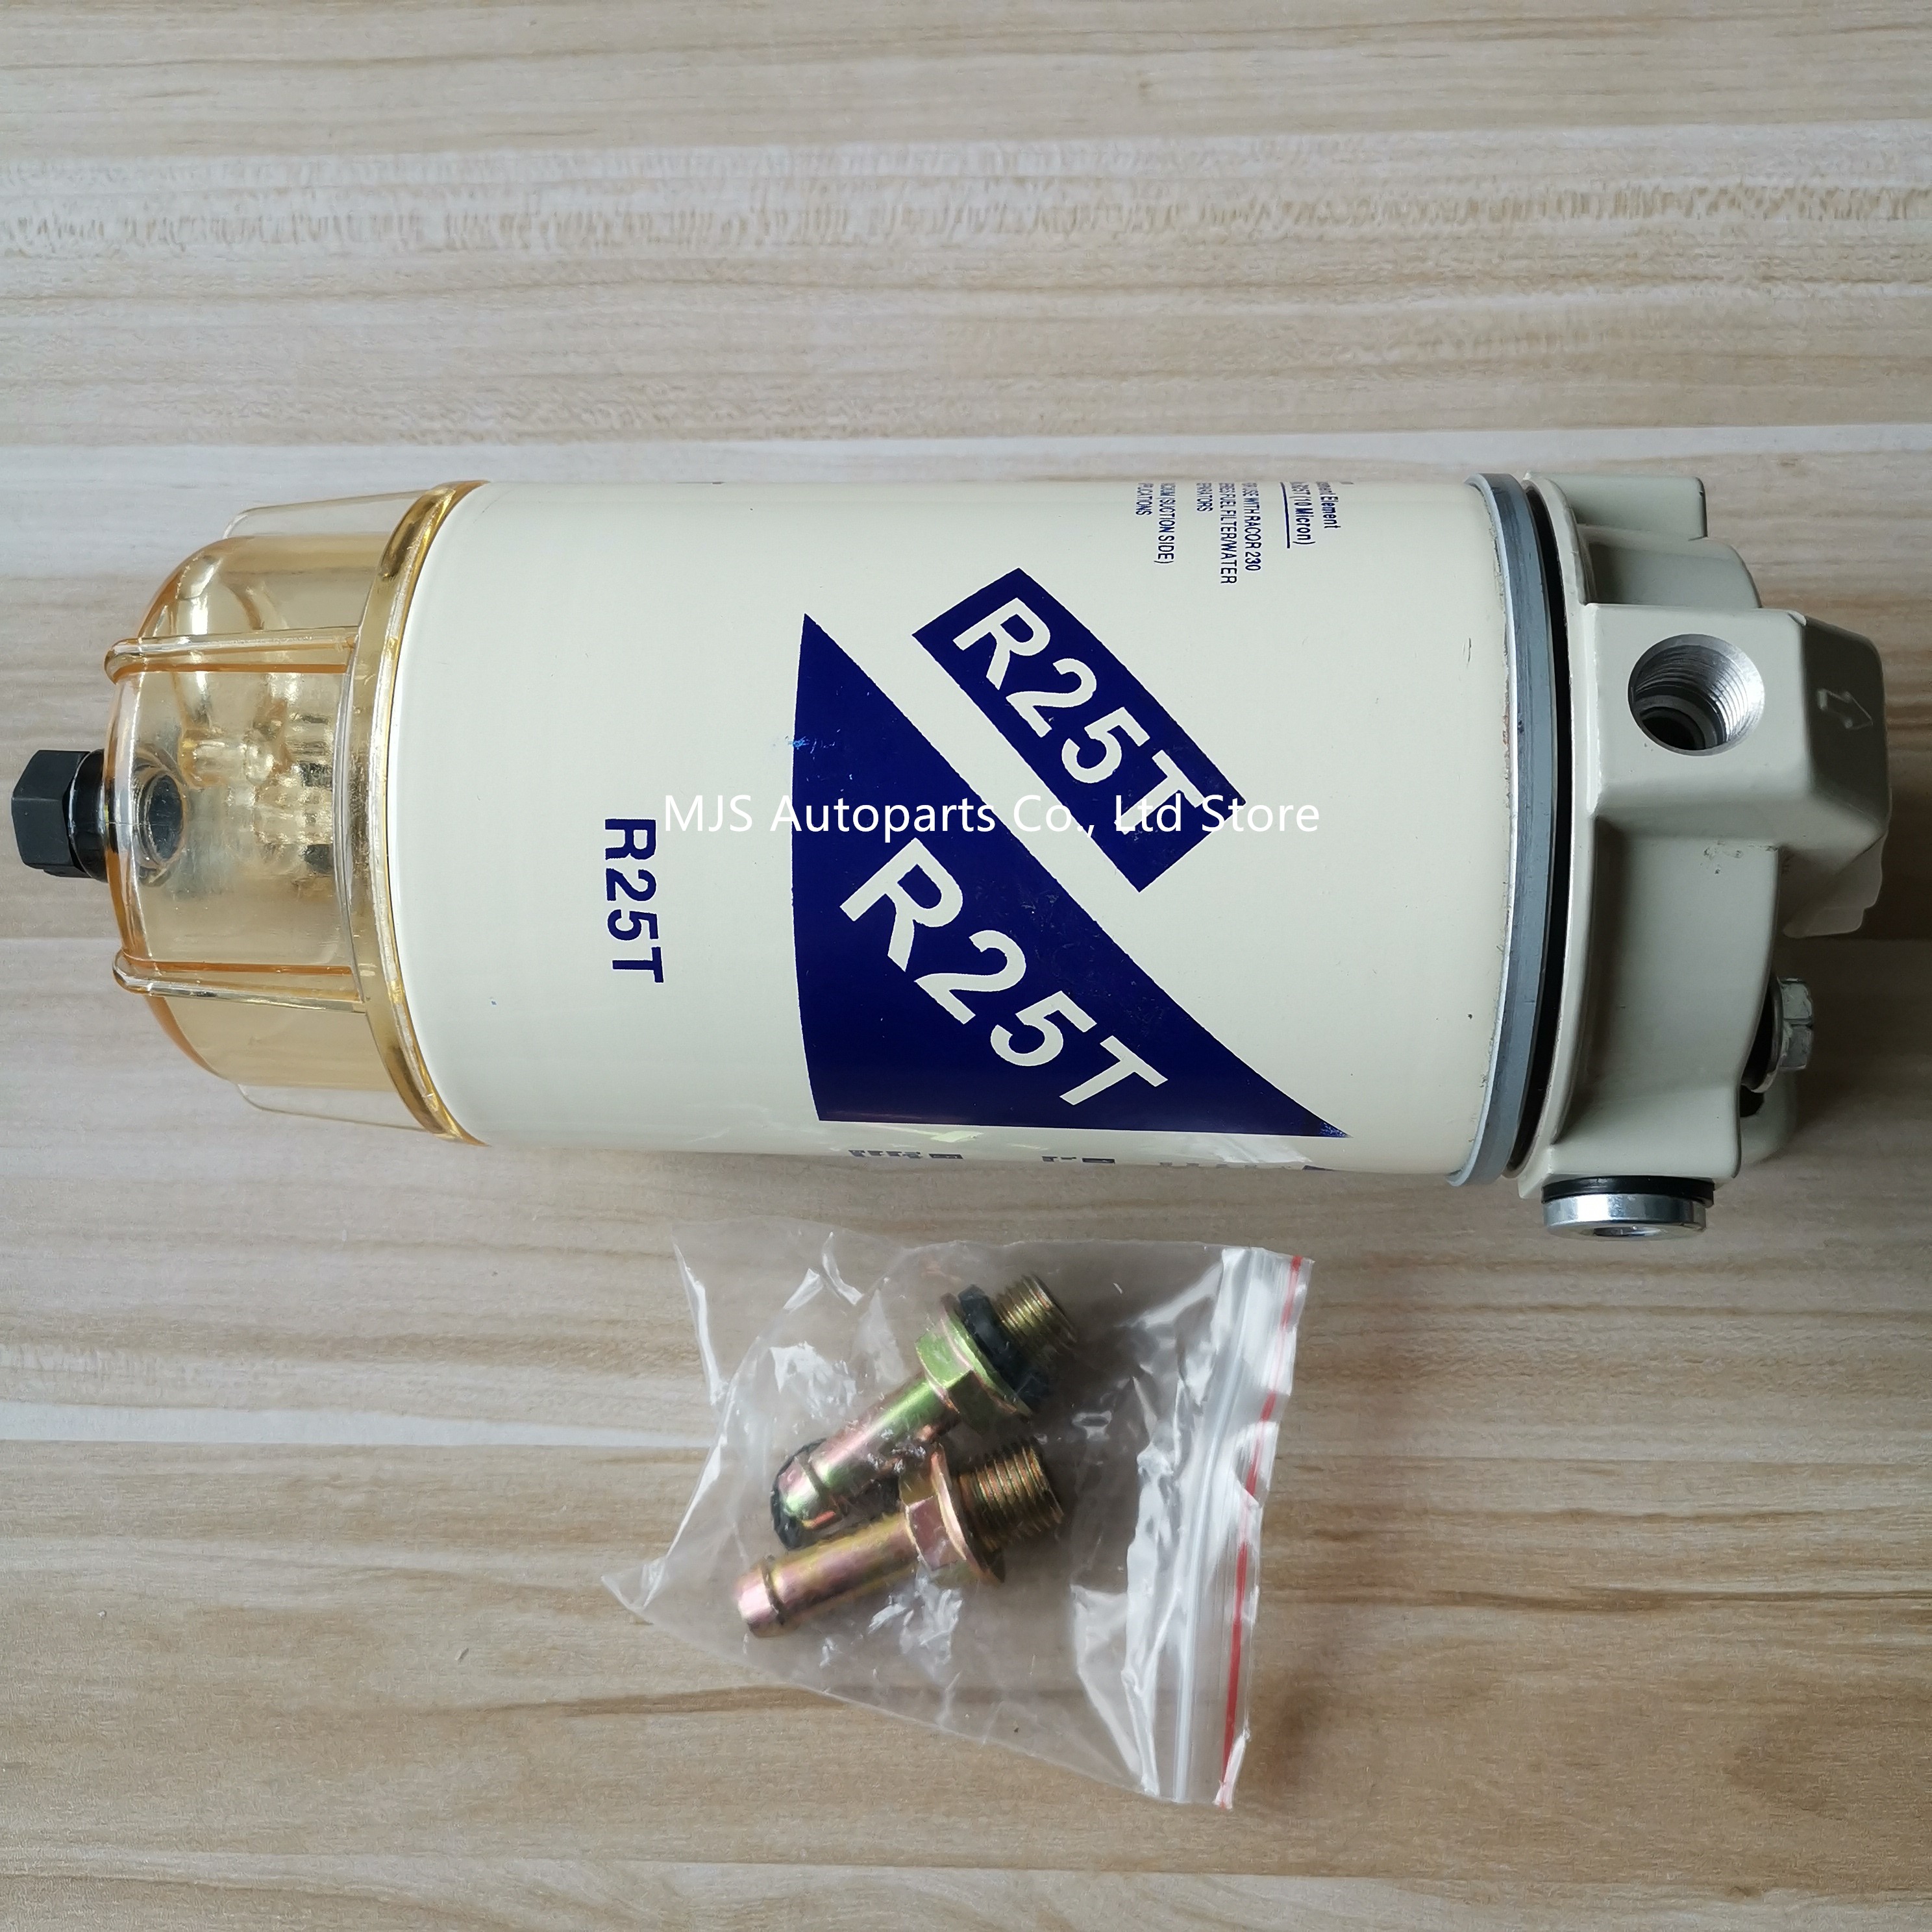 R25T 20998367 Fuel Filter Water Separator Assembly for Turbine Engine Marine Heavy duty truck trailer Mixer truck crane 20478263